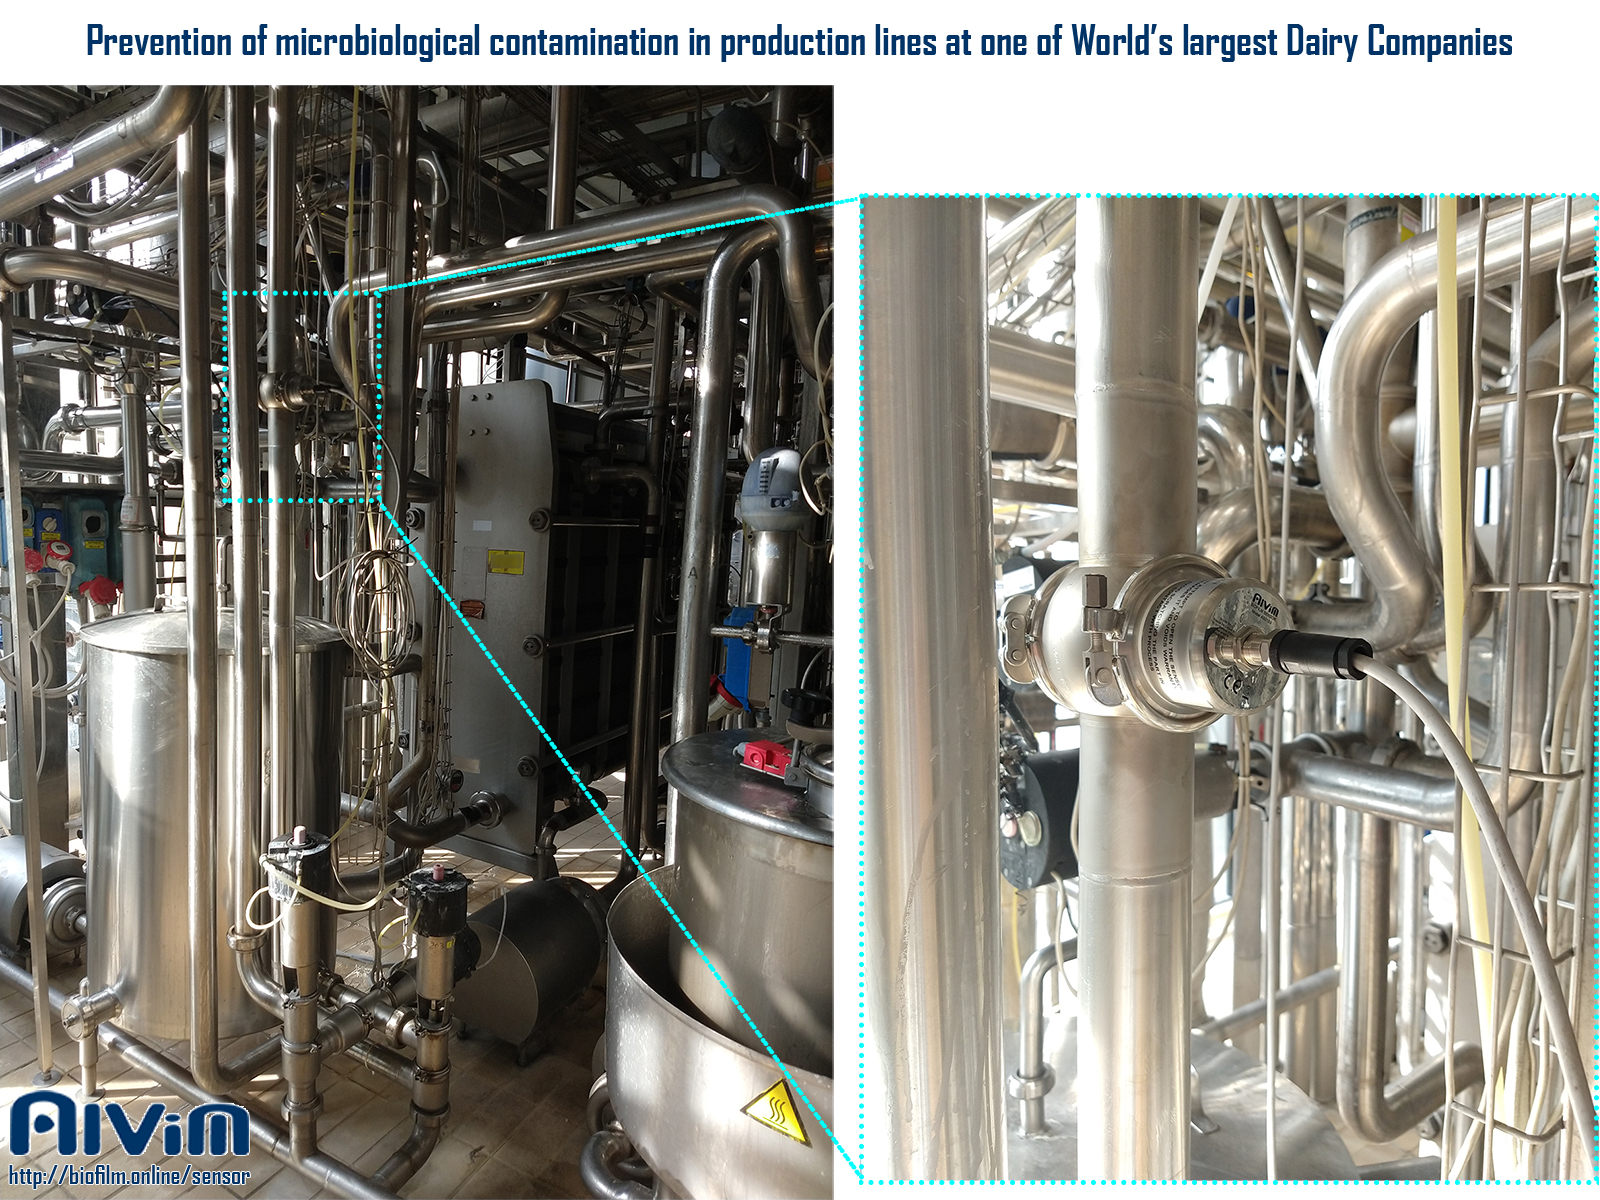 Prevention of bacterial contamination in the Dairy